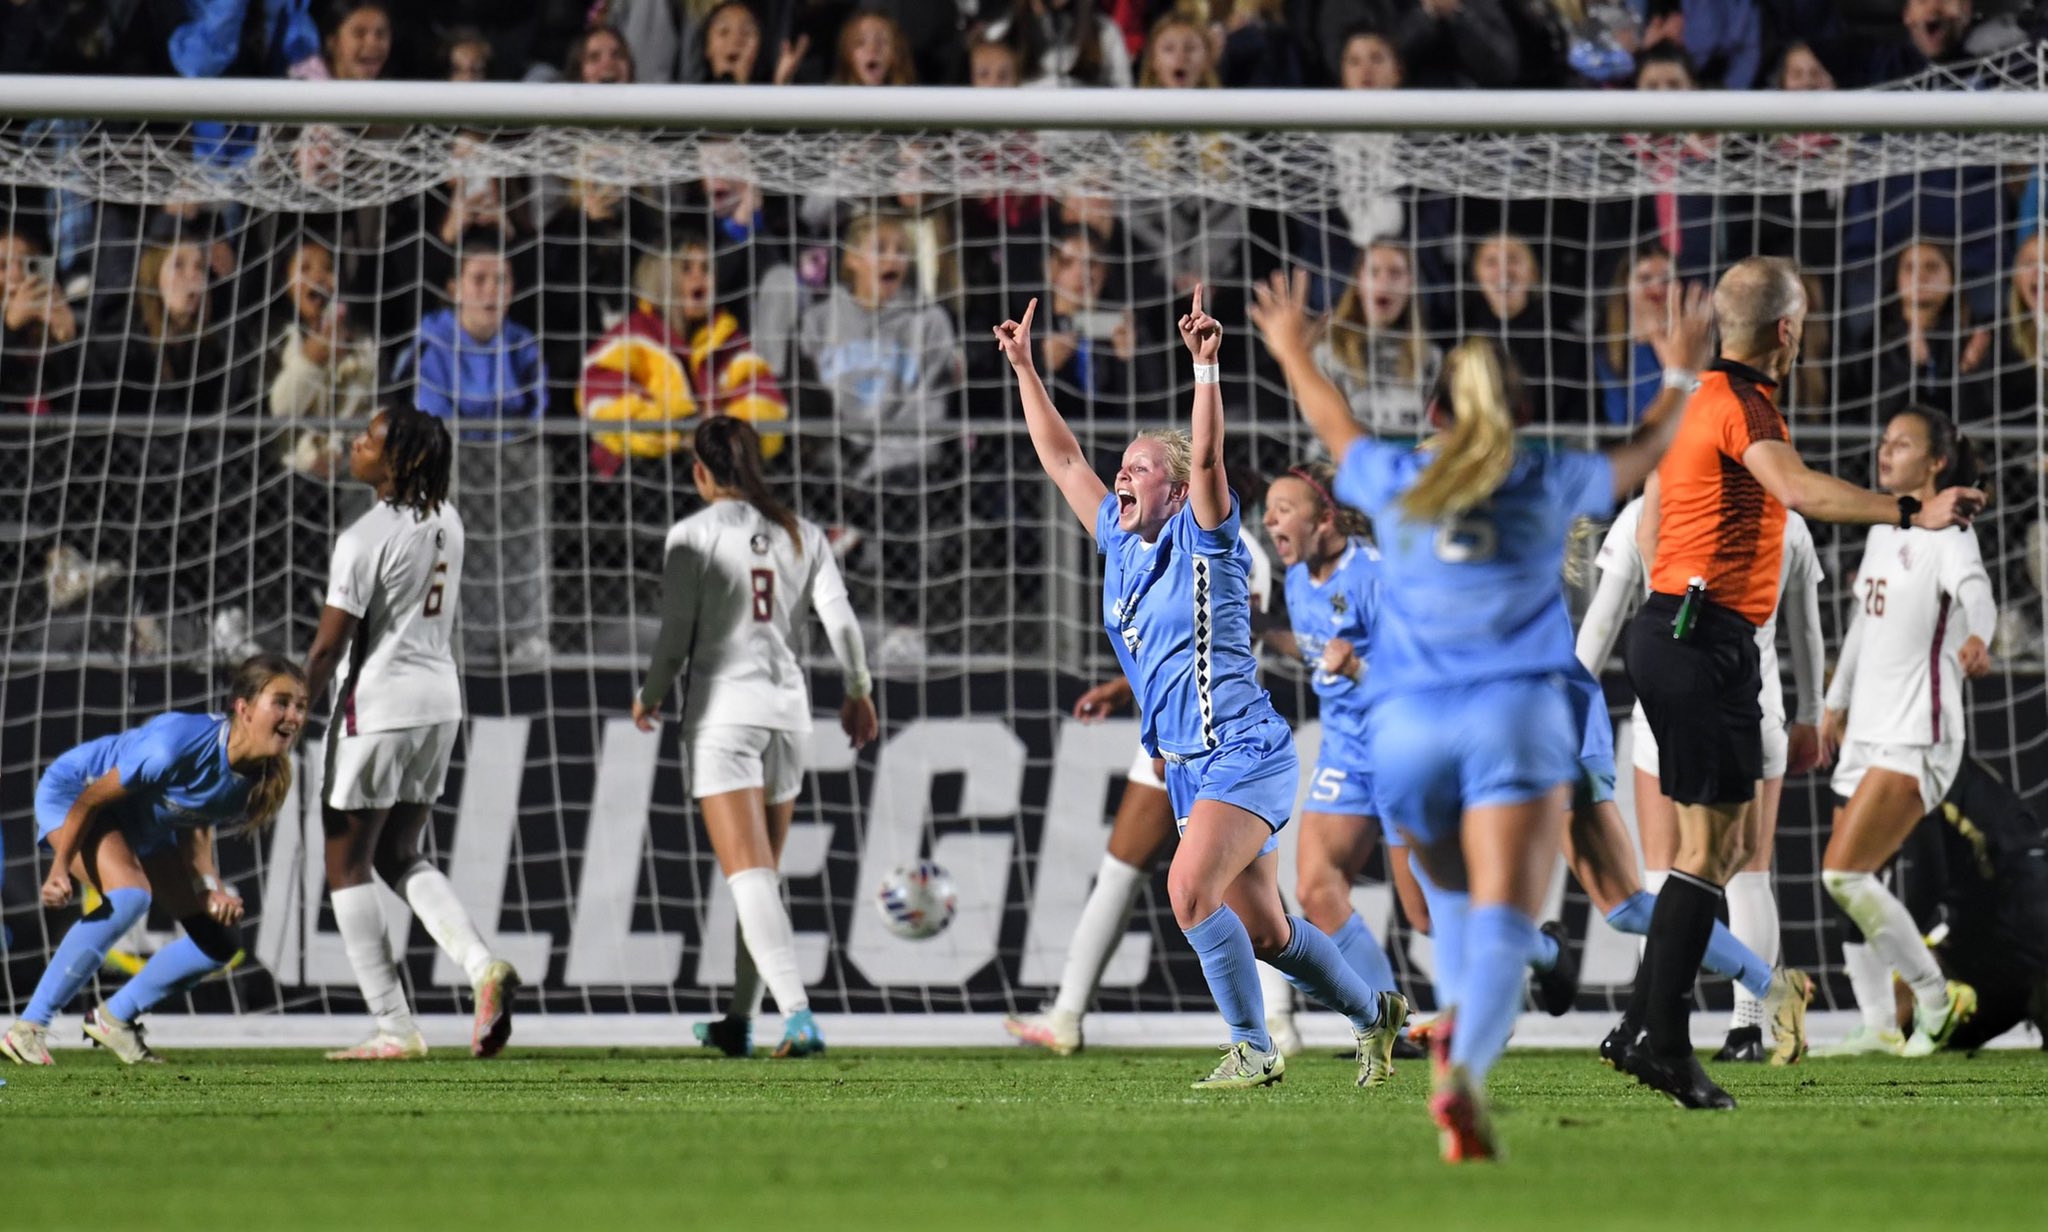 UNC Women’s Soccer Advances to National Championship With 3-2 Win Over FSU